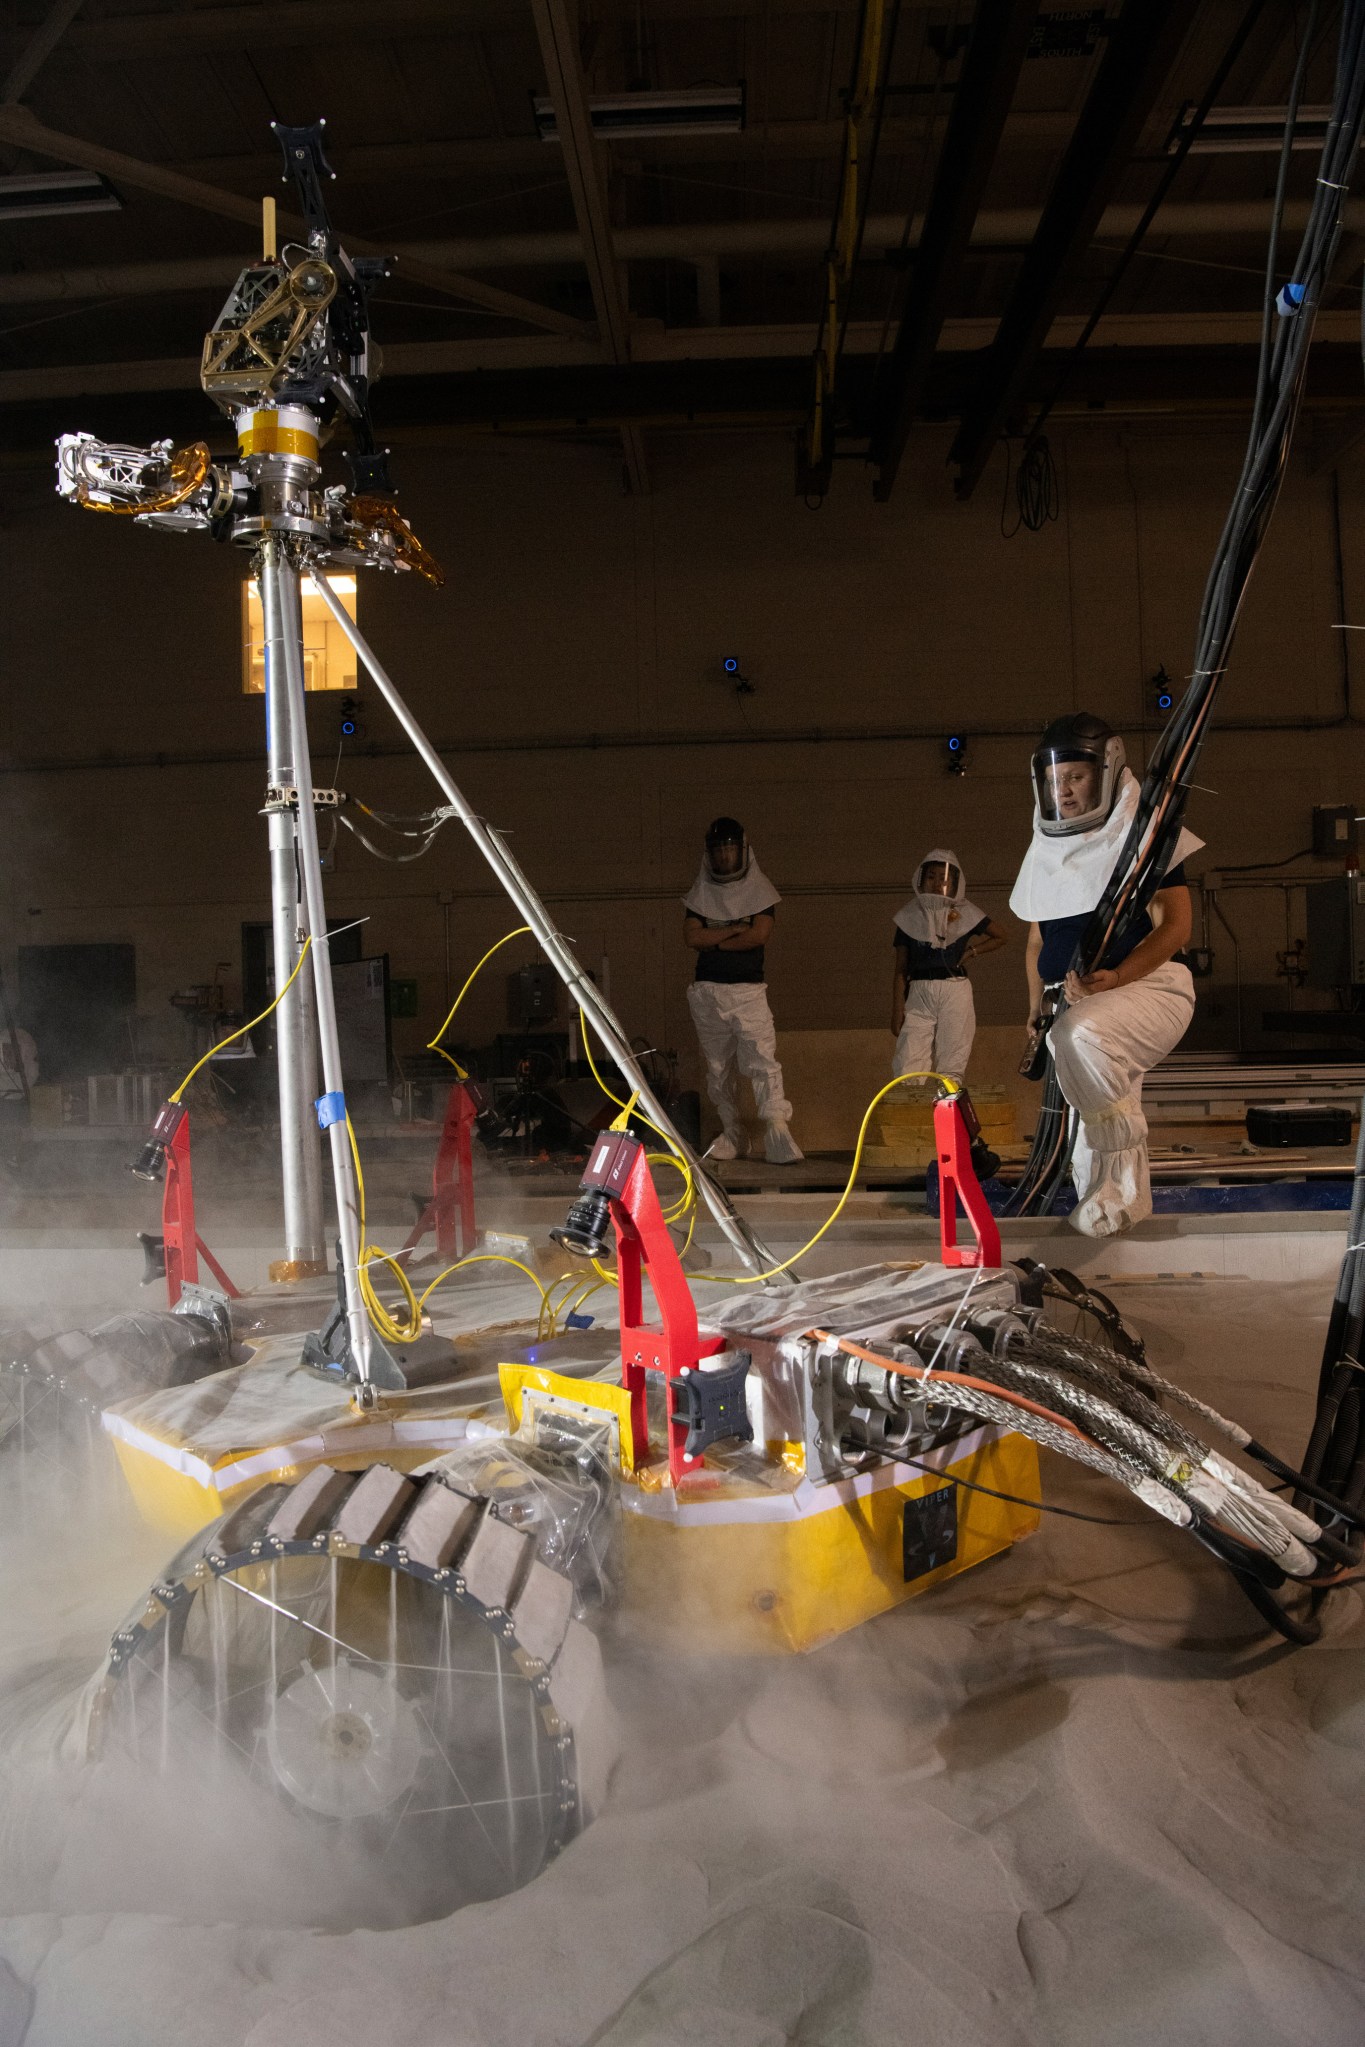 Researchers in protective equipment work with the VIPER rover prototype in lunar simulant soil in the SLOPE lab at Glenn.